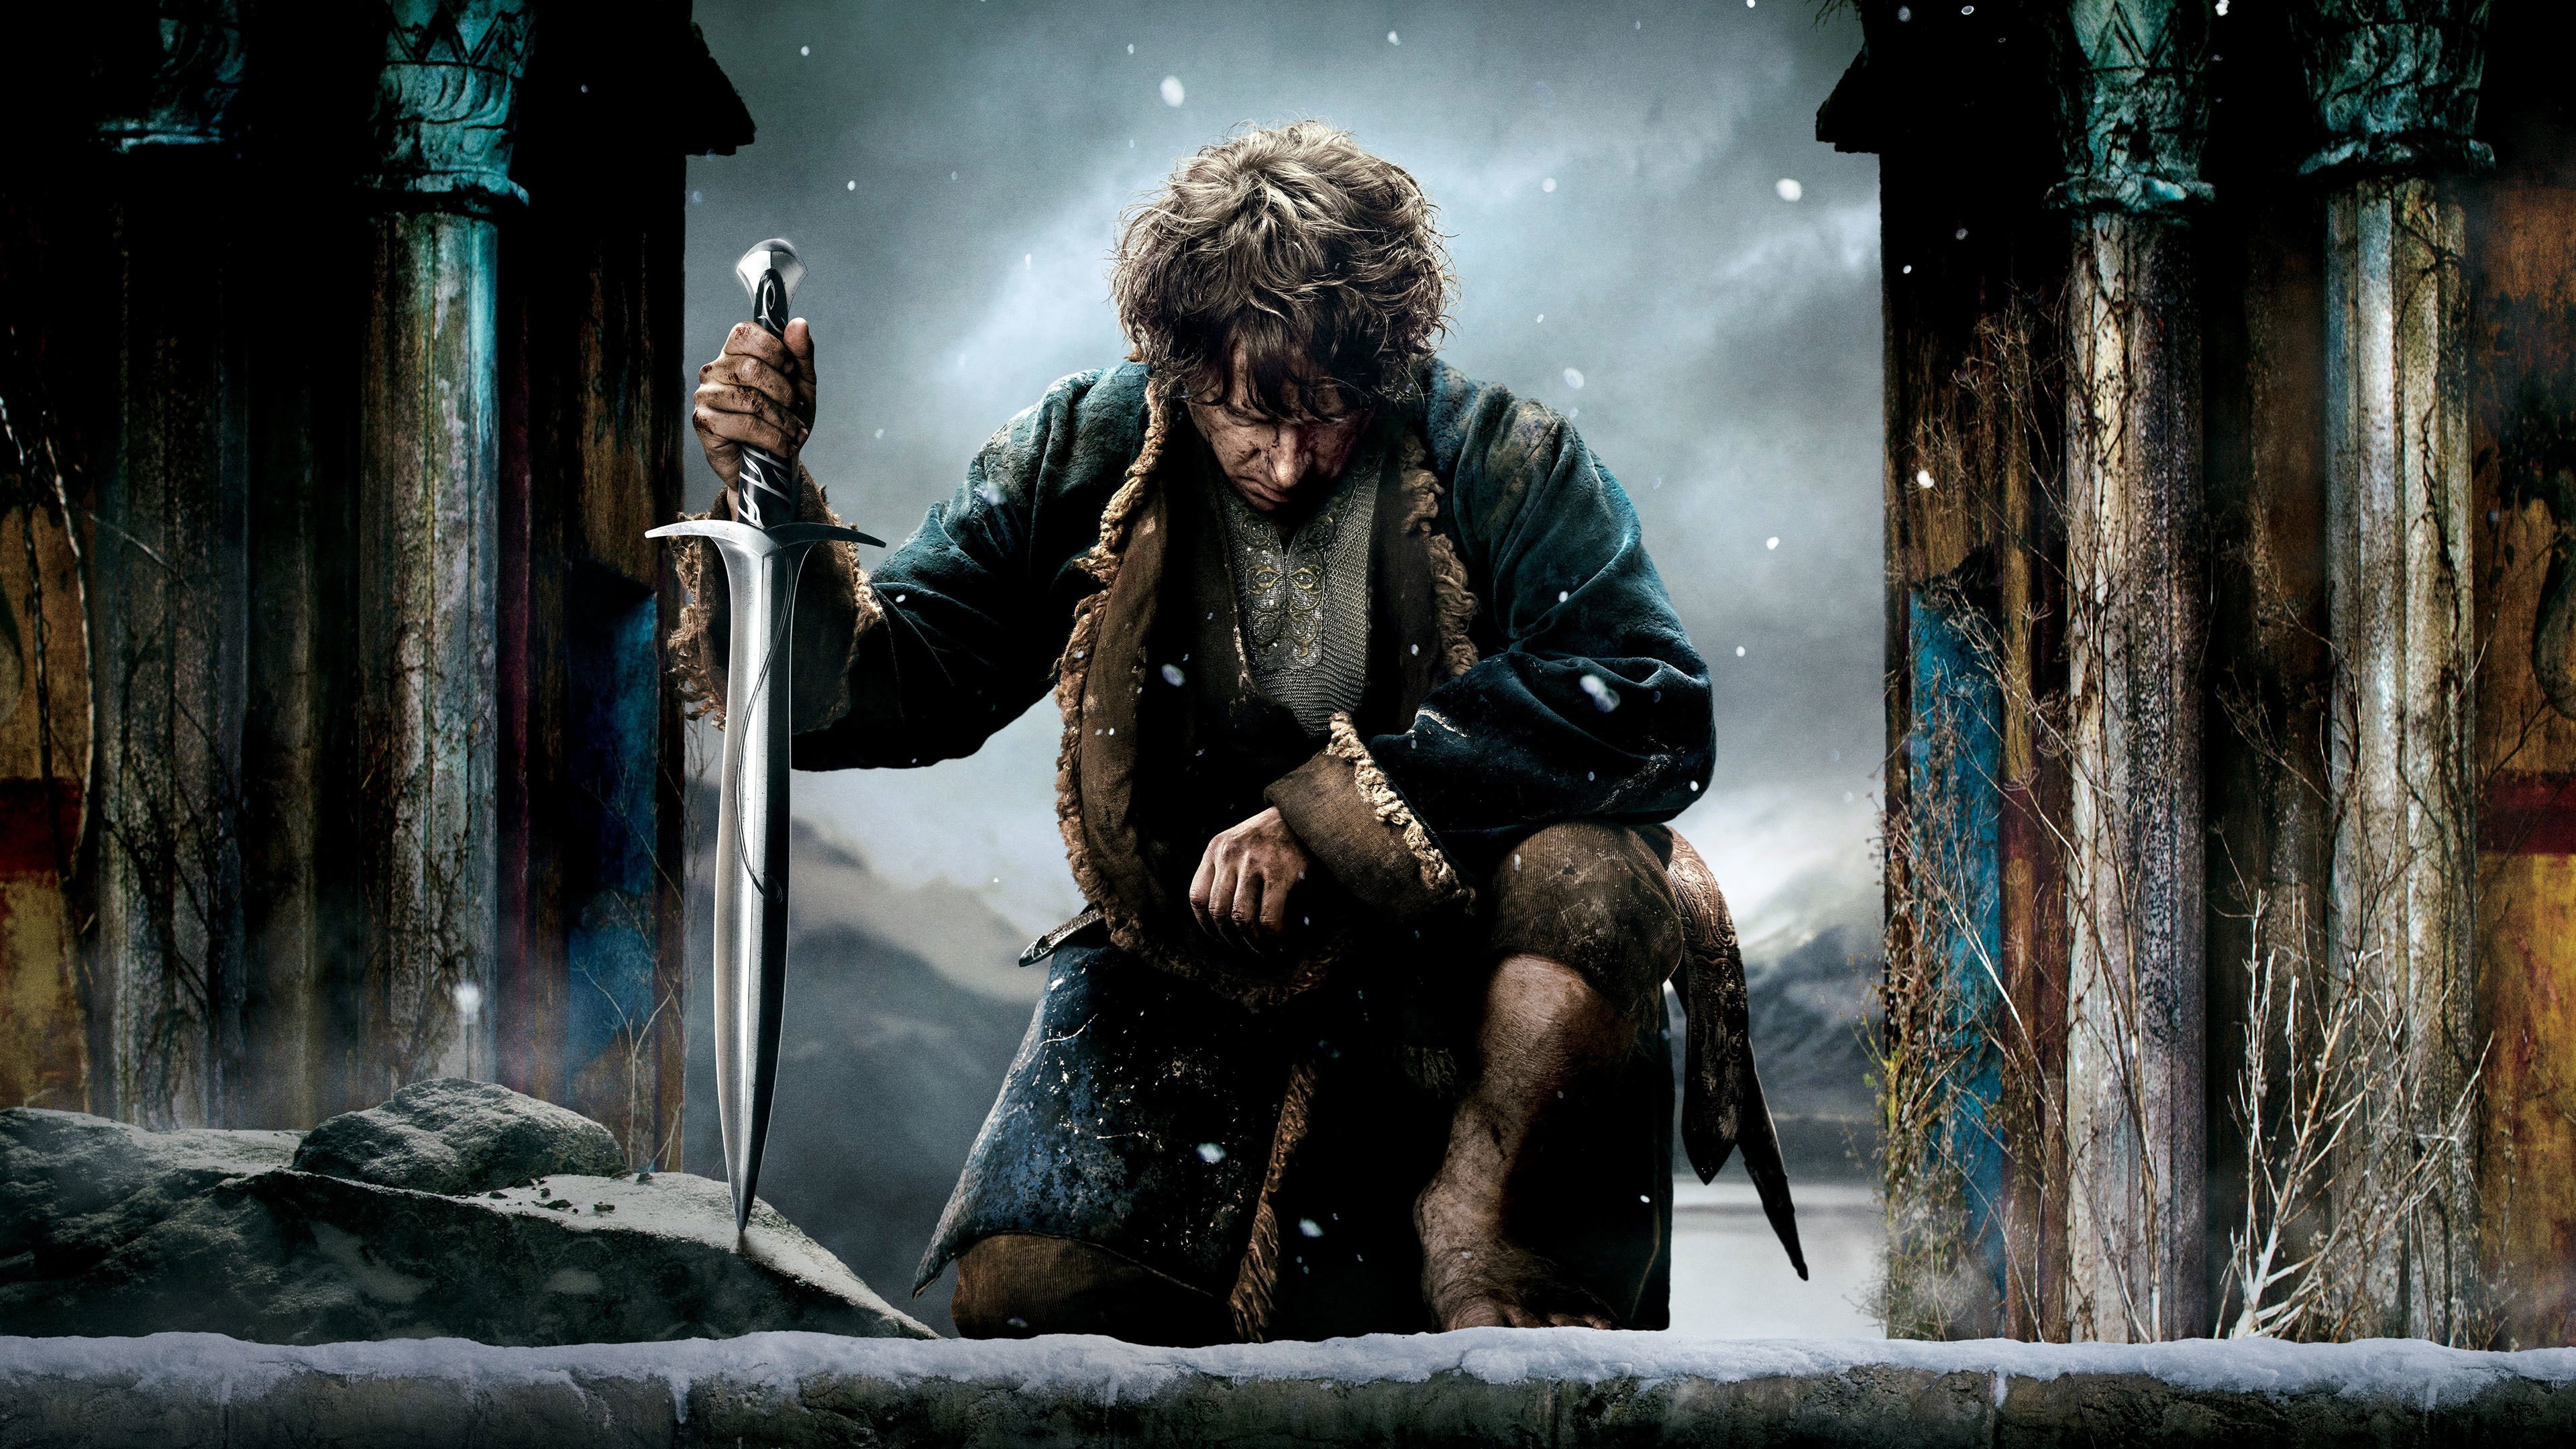 General 3840x2160 The Hobbit movies Bilbo Baggins sword Martin Freeman The Hobbit: The Battle of the Five Armies Sting actor Peter Jackson J. R. R. Tolkien Book characters